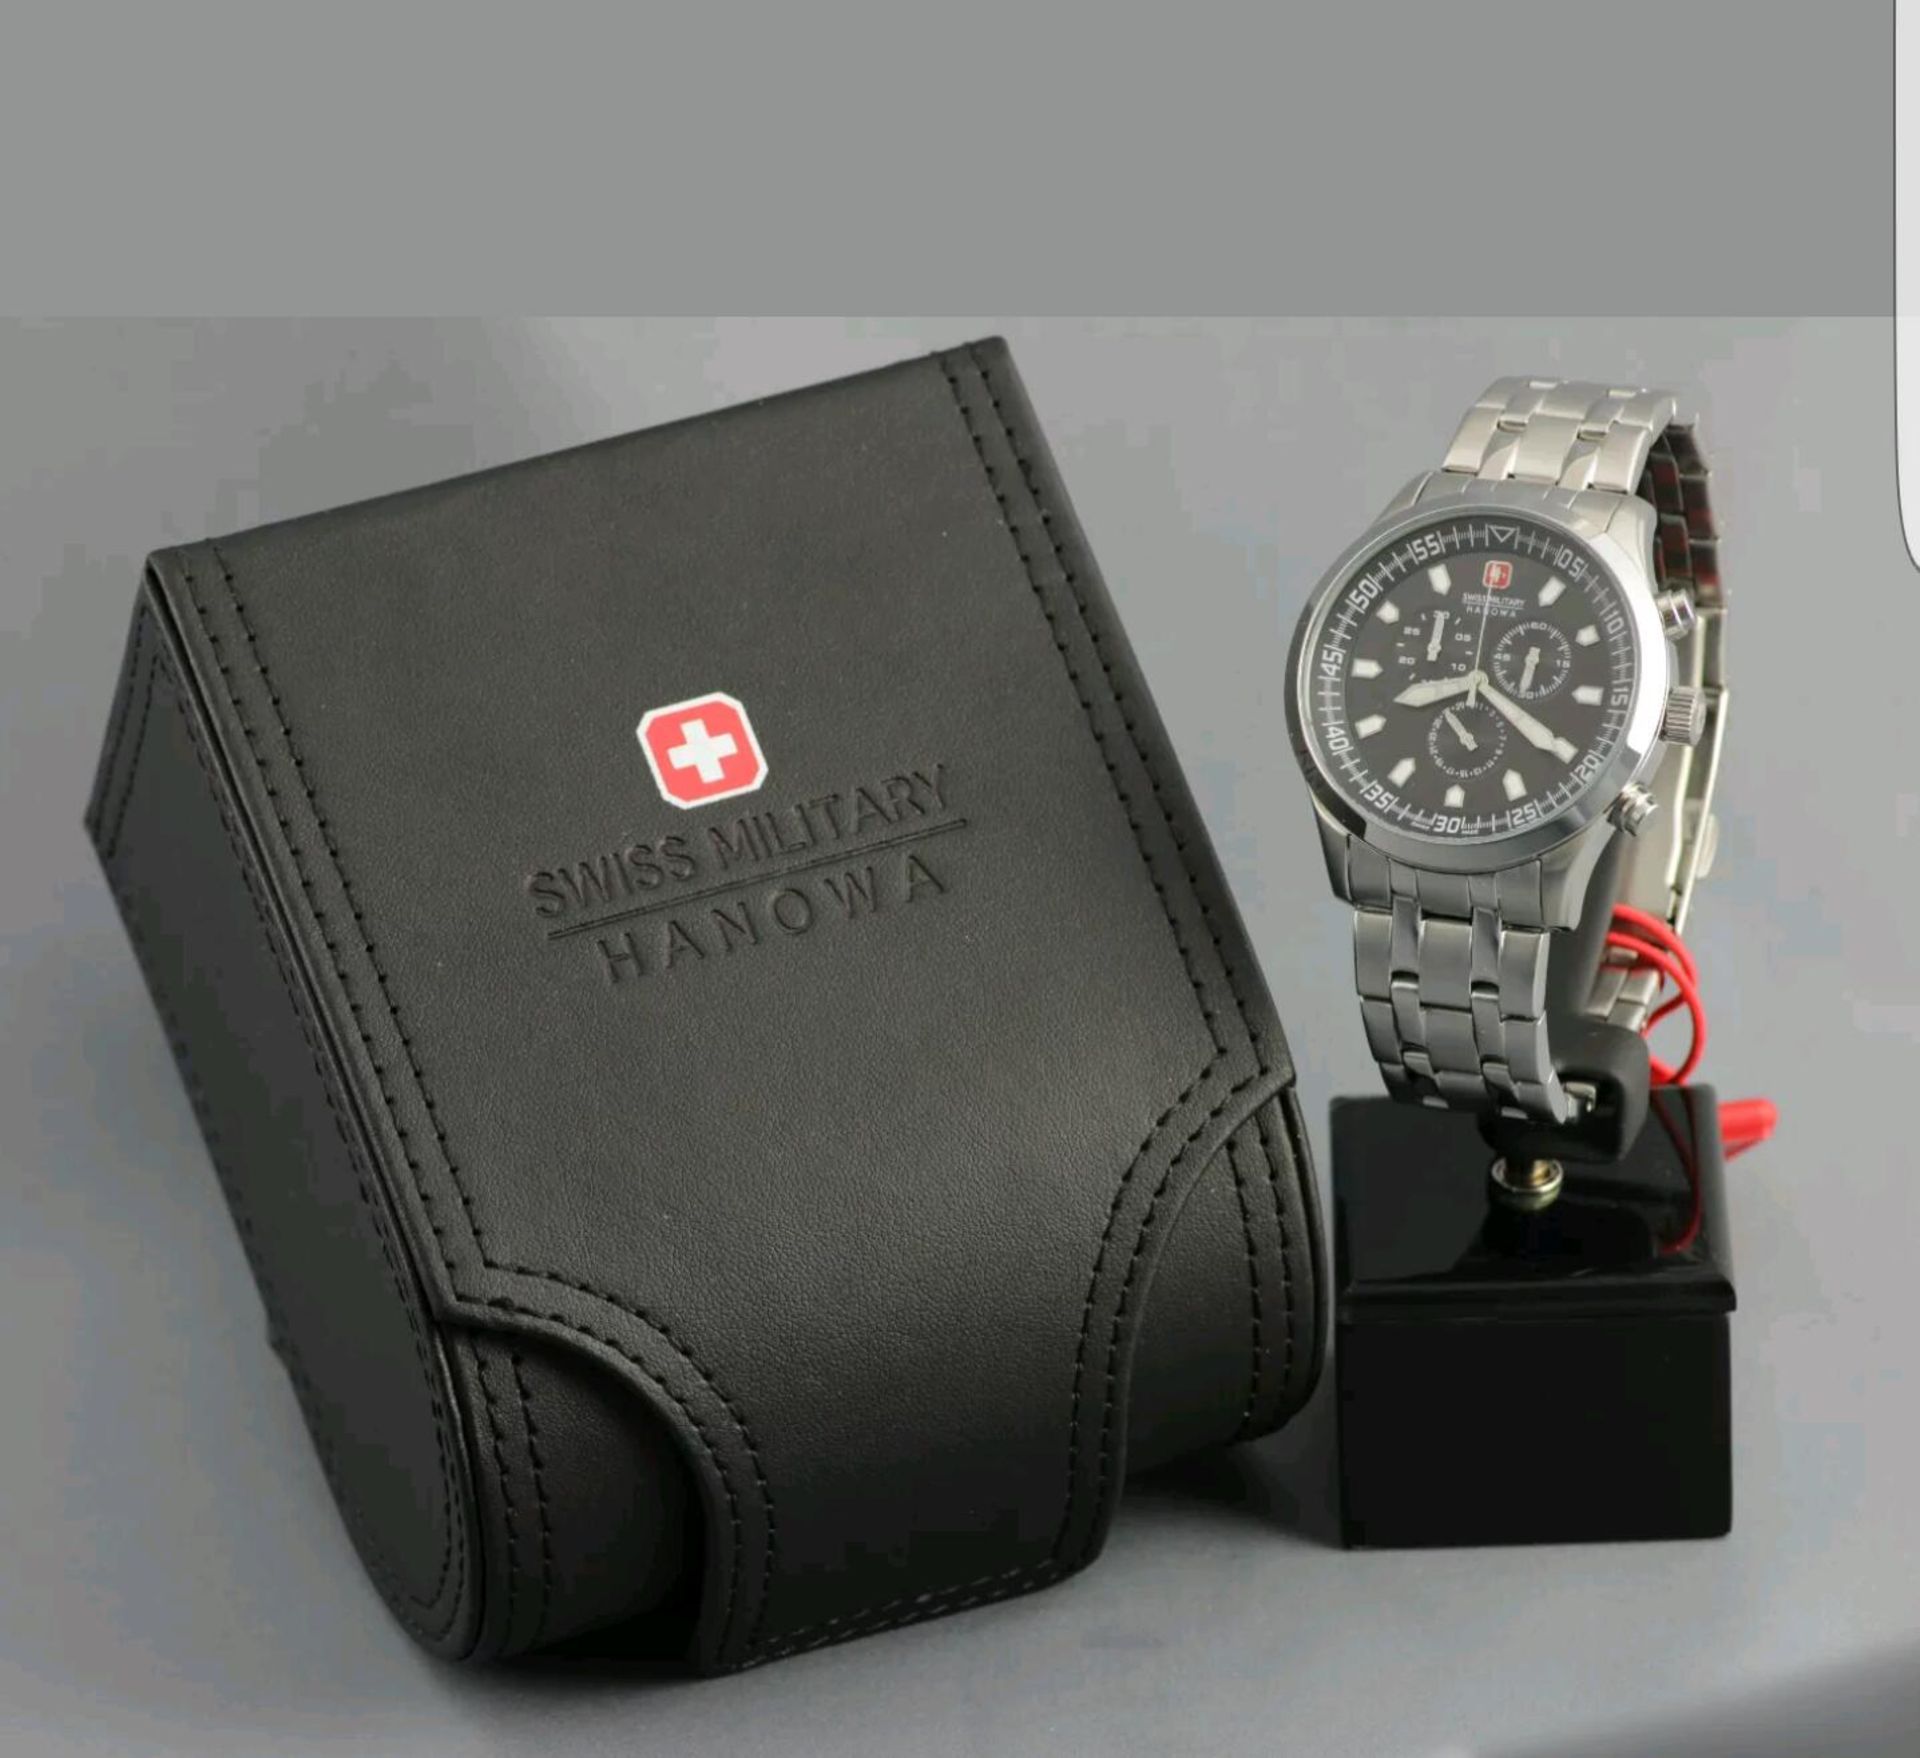 BRAND NEW GENTS SWISS MILITARY WATCH, 06-5264.04.007 , COMPLETE WITH ORIGINAL BOX AND MANUAL - - Image 2 of 2